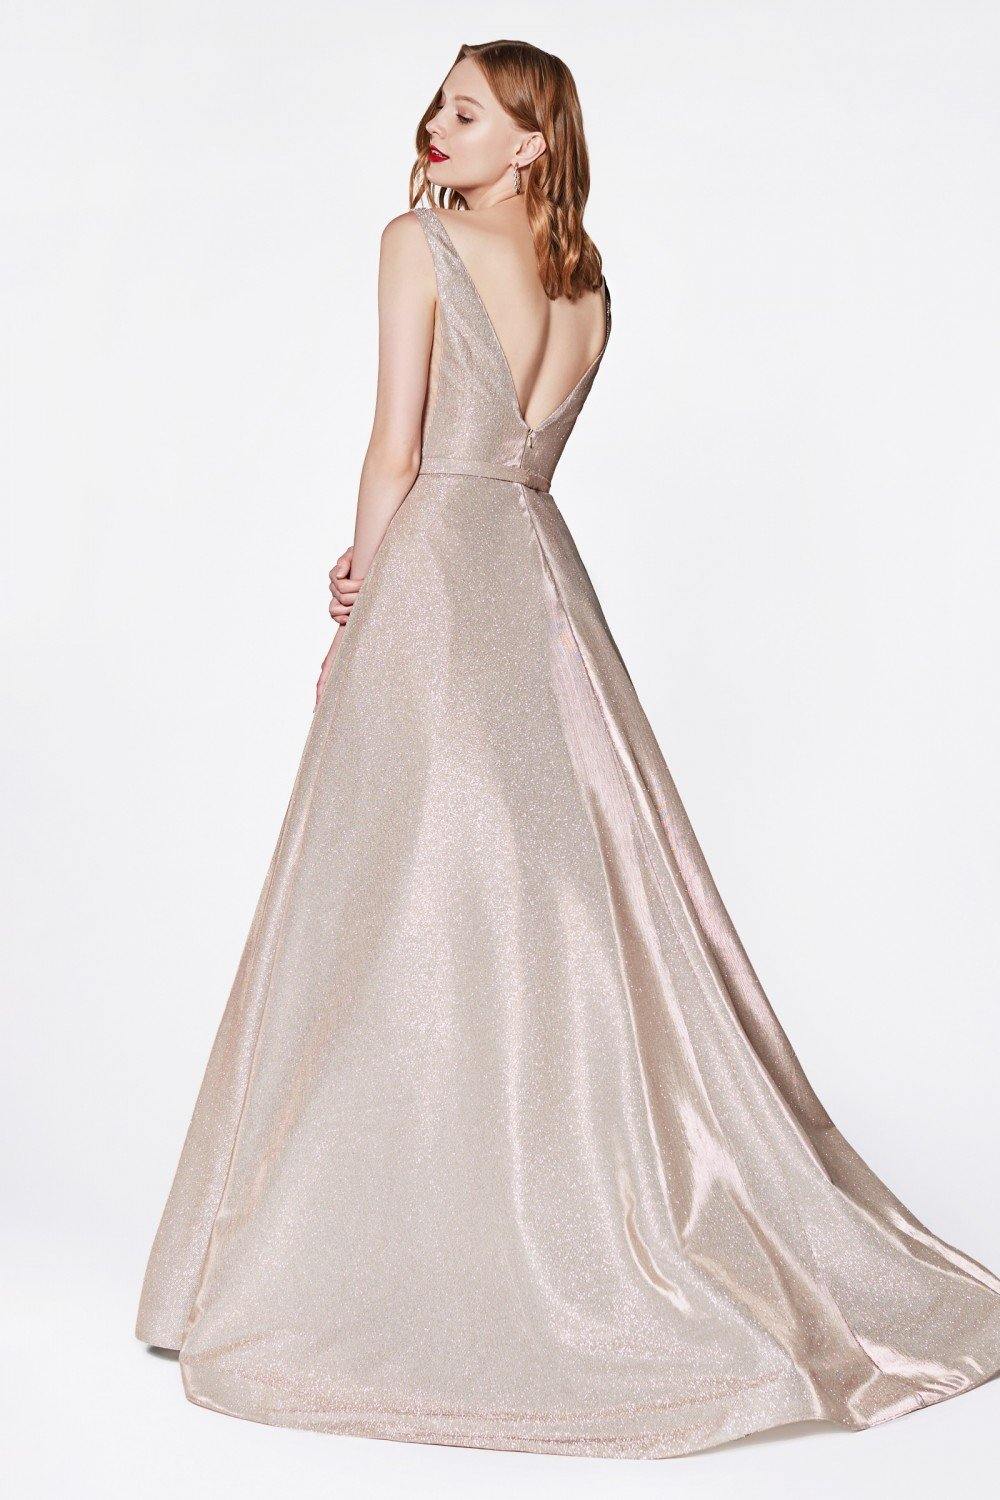 Prom Long Champagne Glitter Dress - The Dress Outlet